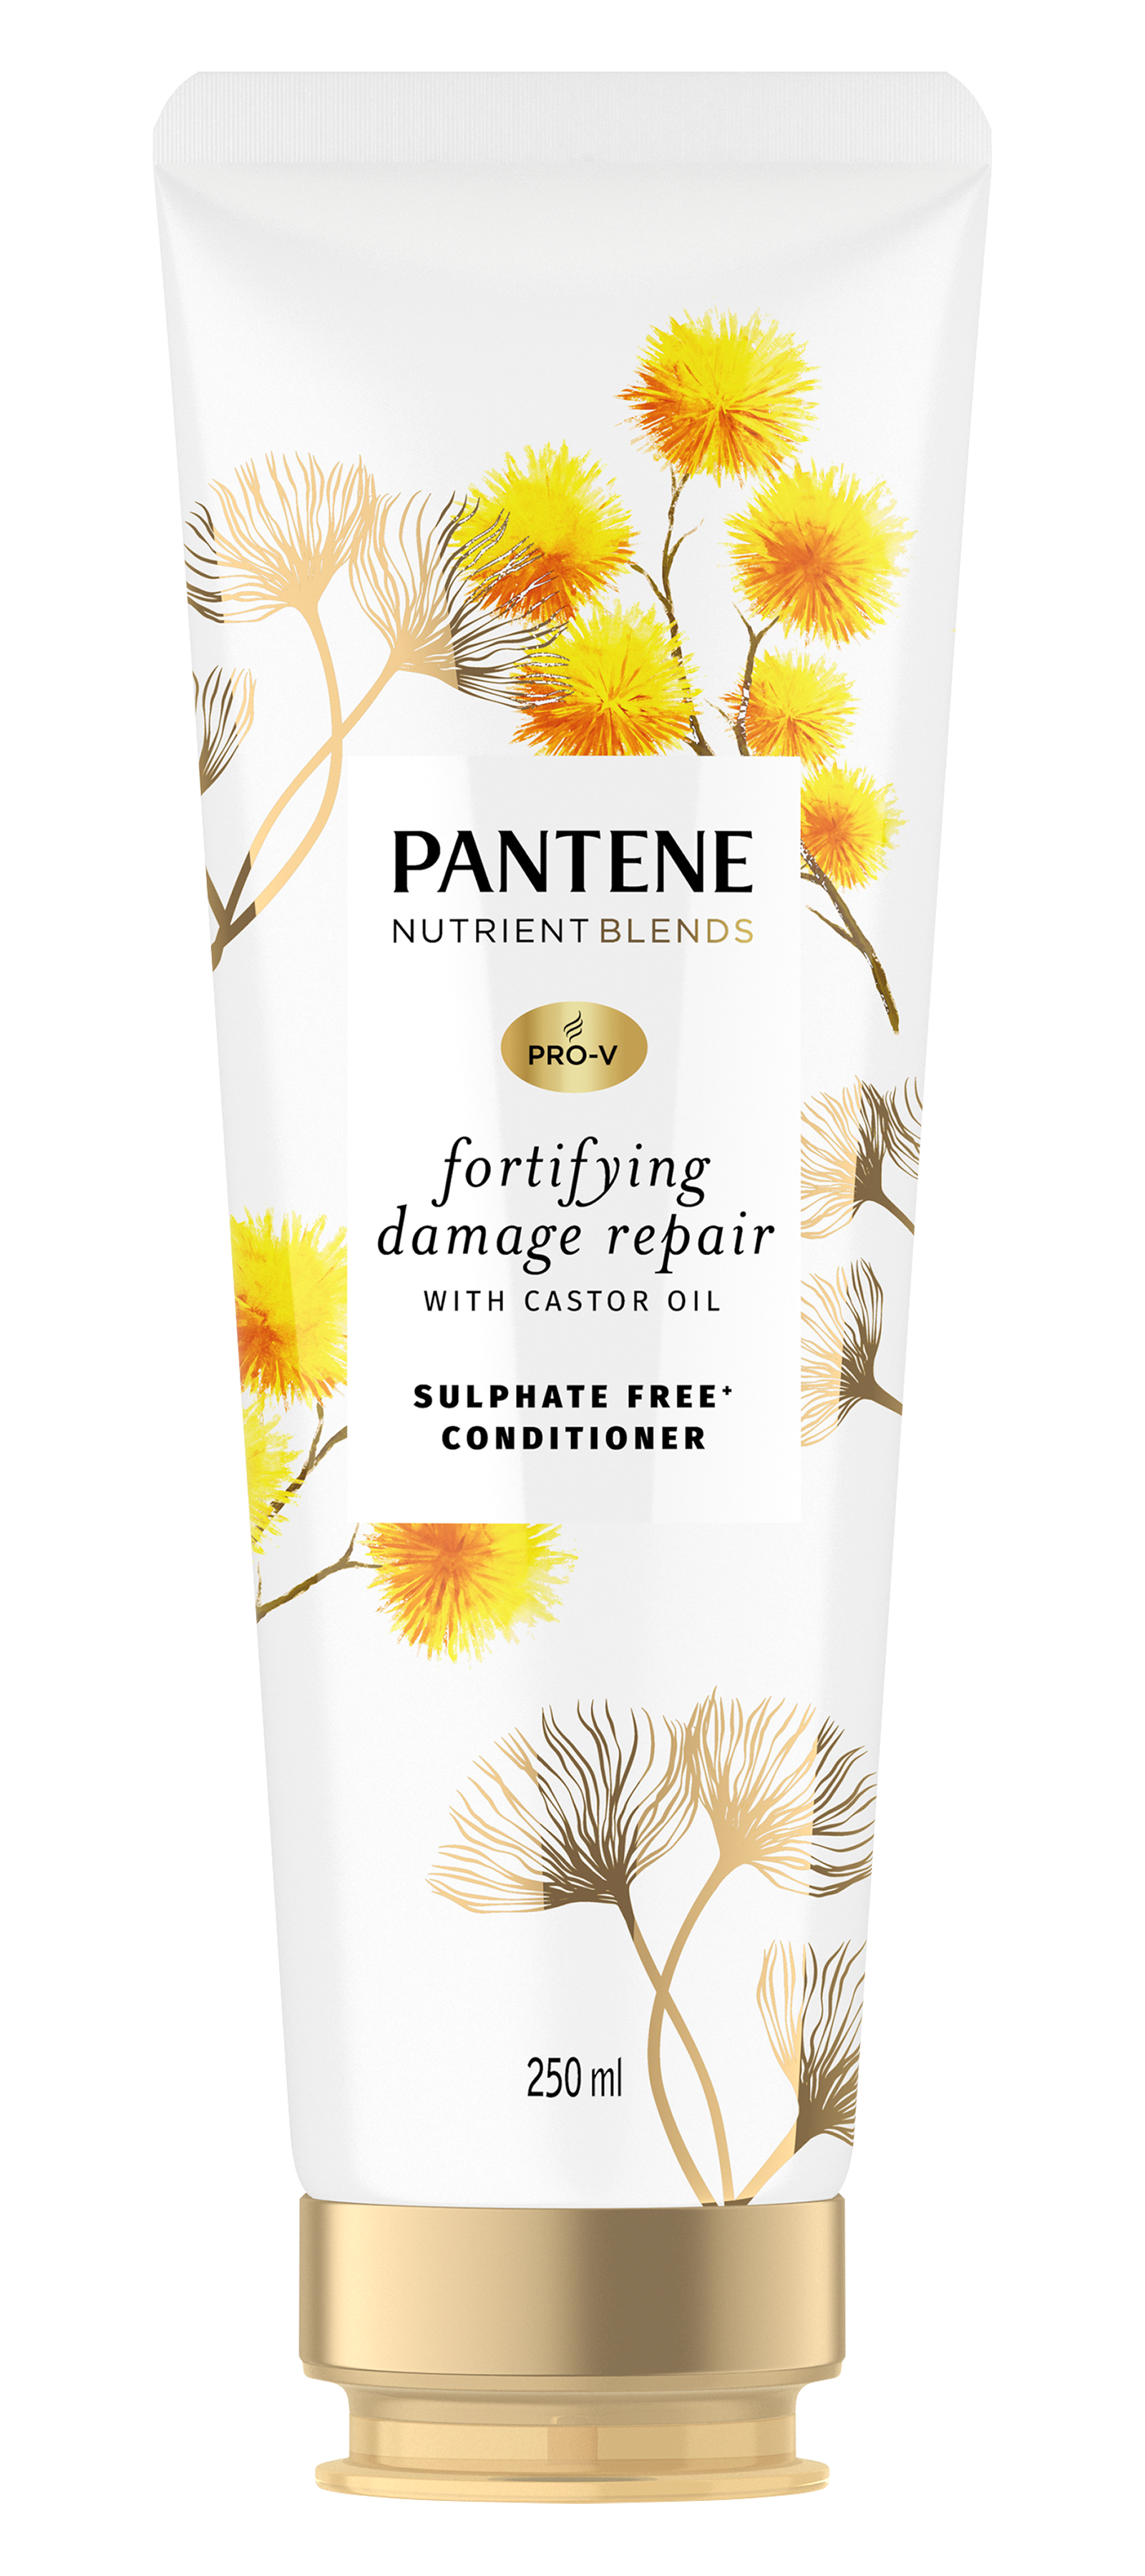 Pantene Nutrient Blends Fortifying Damage Repair Conditioner with Castor Oil